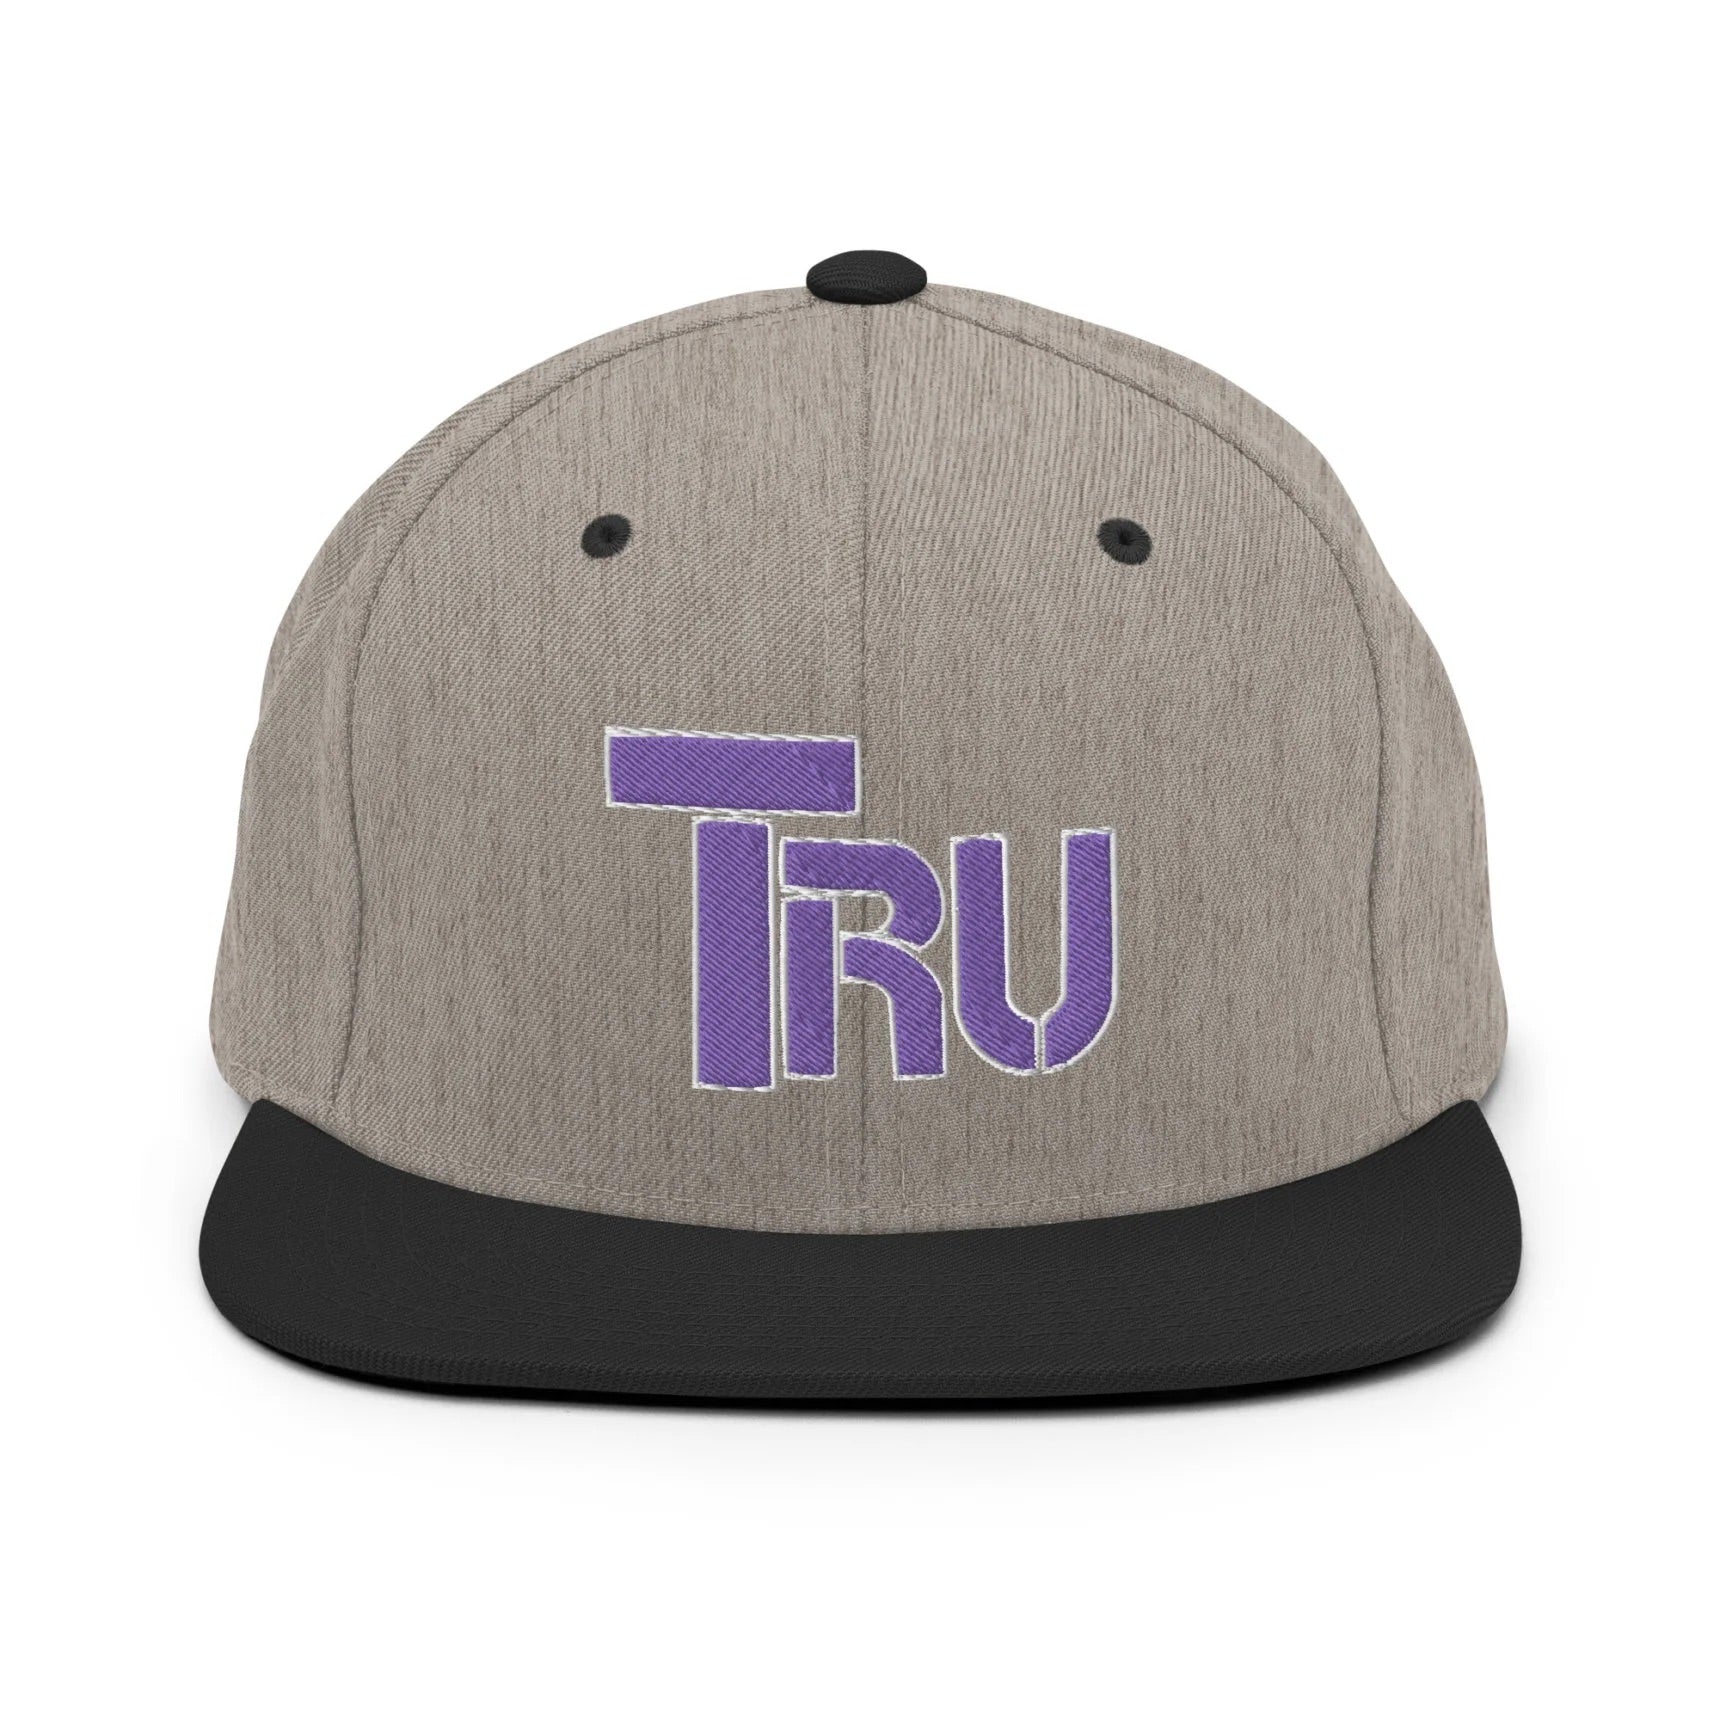 Tru ShowZone snapback hat in heather grey with black brim and accents